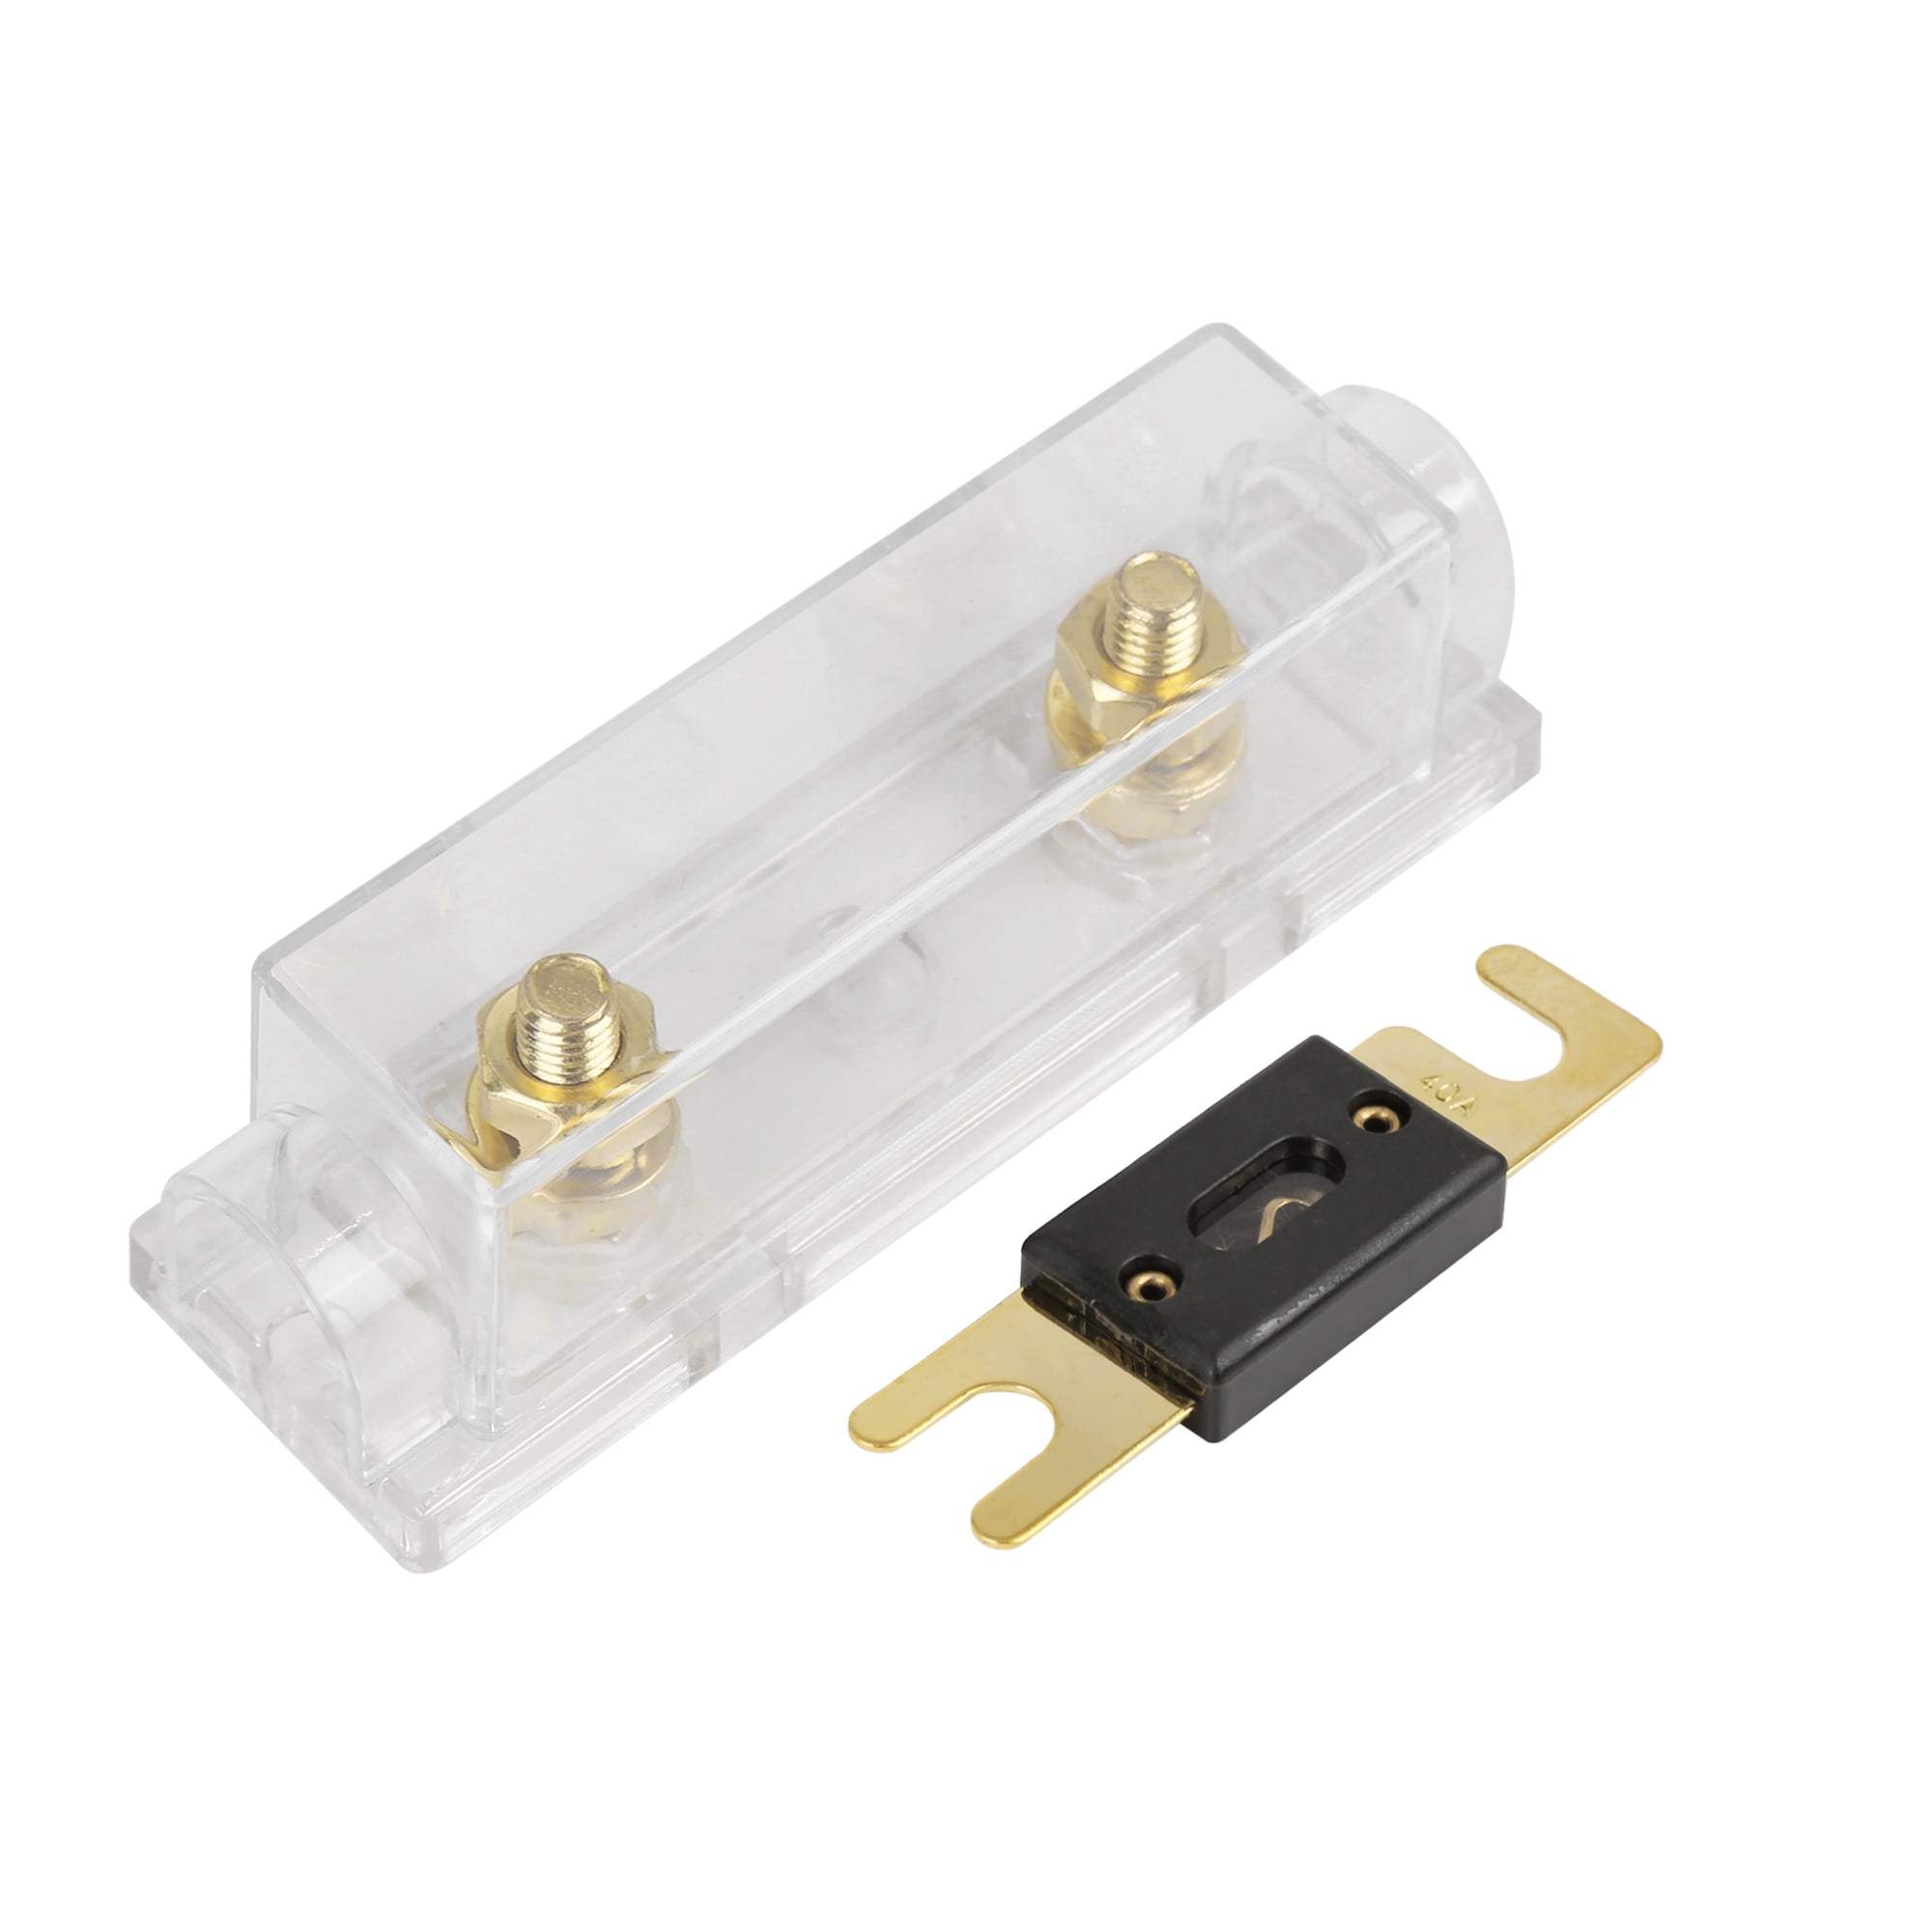 Baomain ANL Fuse ANL-40 40 Amp 40A for Car Vehicles Audio System Sheet Gold Tone 2 Pack